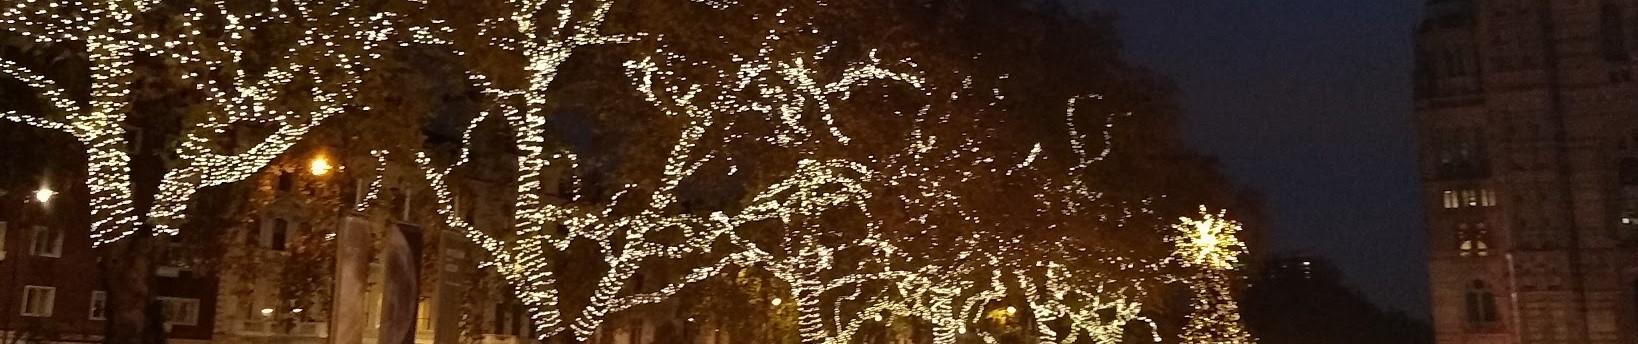 Outside the Natural Hiatory Museum, London: London plane trees on December night illuminated by numerous white bulbs.